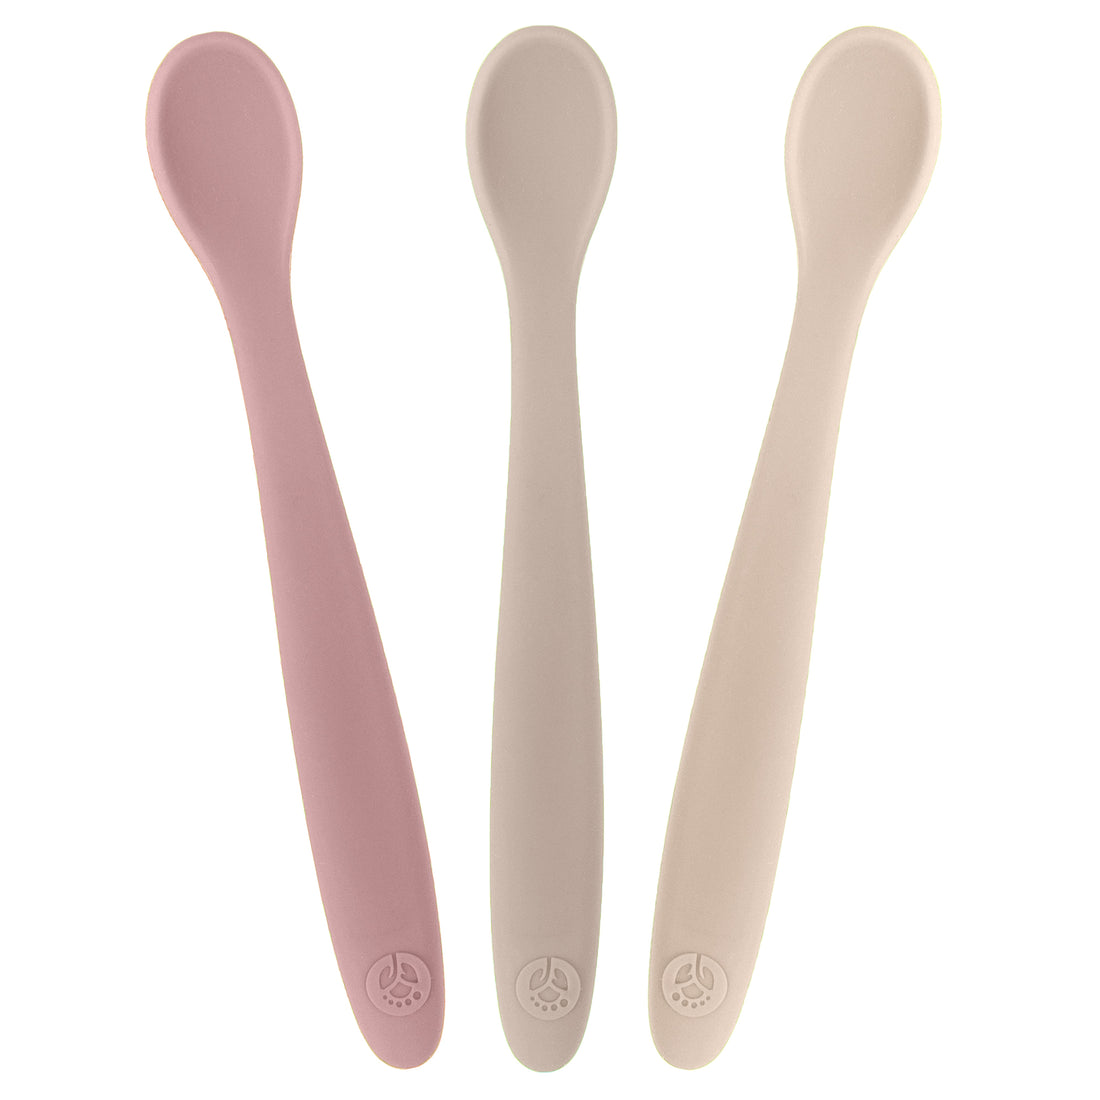 WeeSprout Baby Spoons for Self Feeding 6 Months +, Soft & Durable Silicone  Baby Utensils for Sensitive Gums & Teeth, Easy Grip Handles for Little